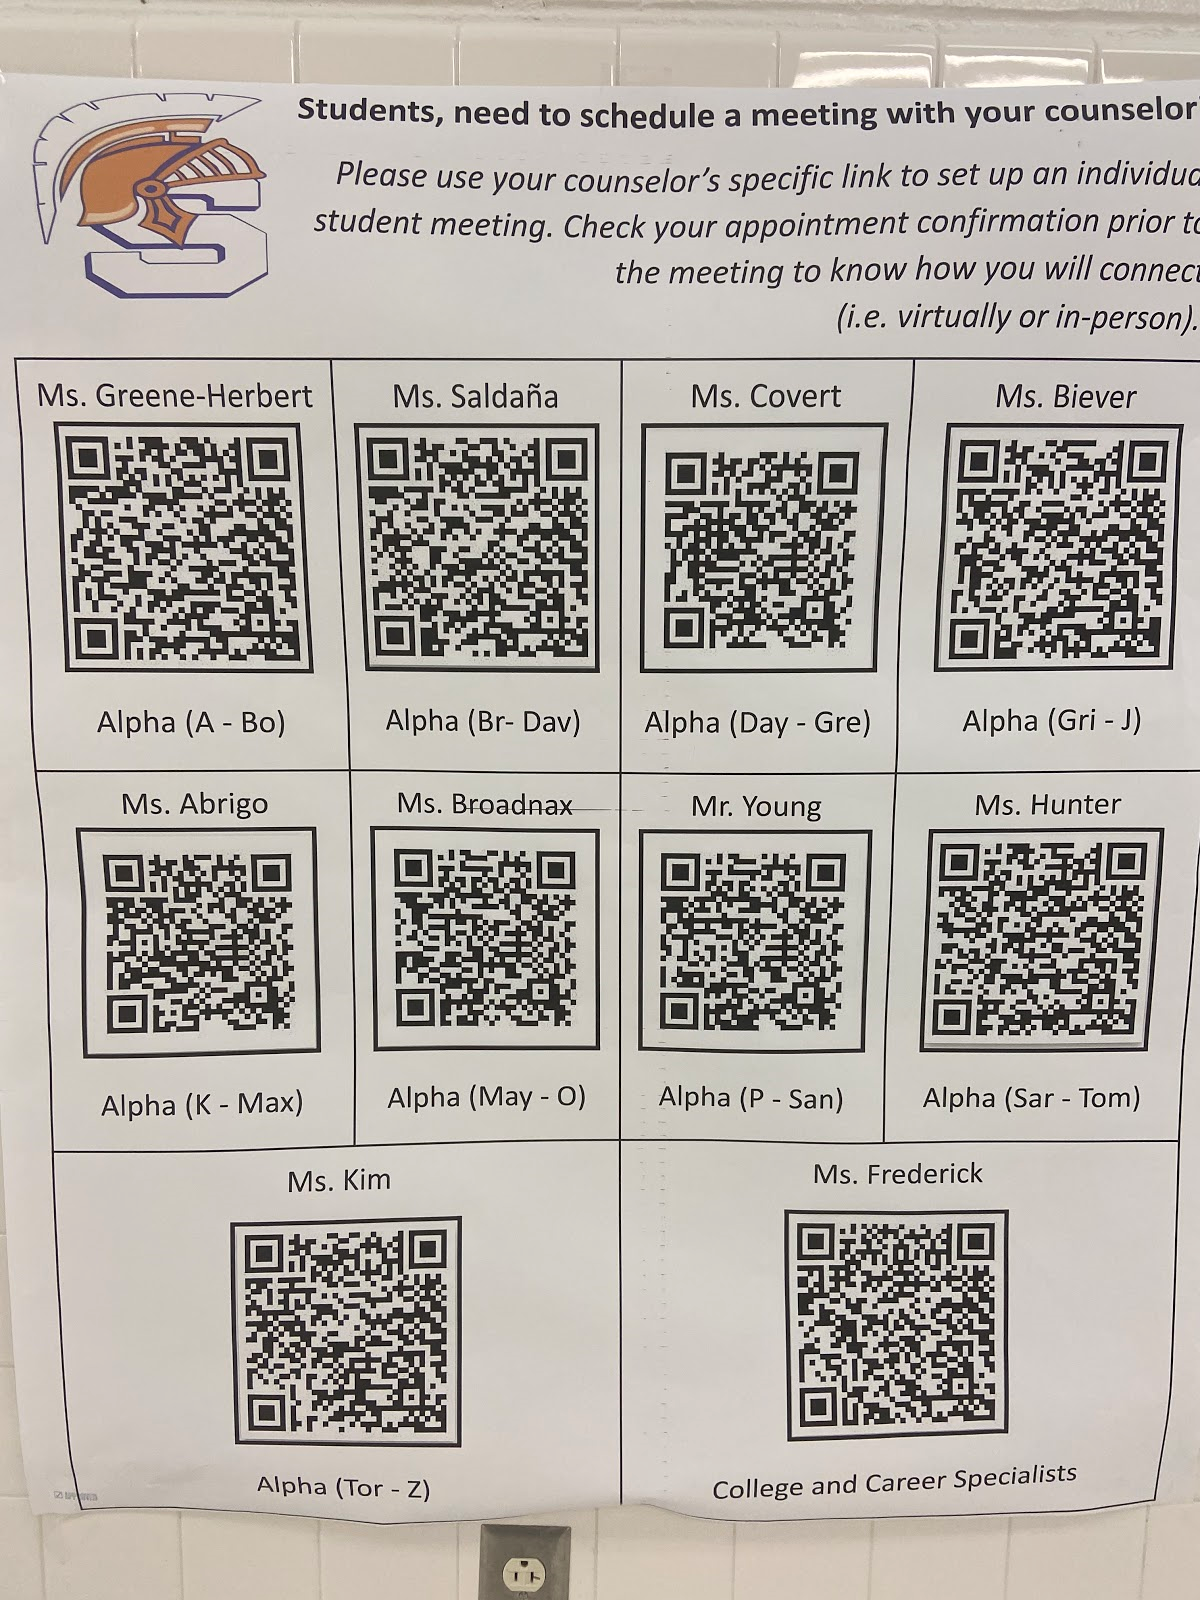 Now students are able to request a meeting with your counselor easily. Scanning the QR codes will take them to a google form to request a private meeting.